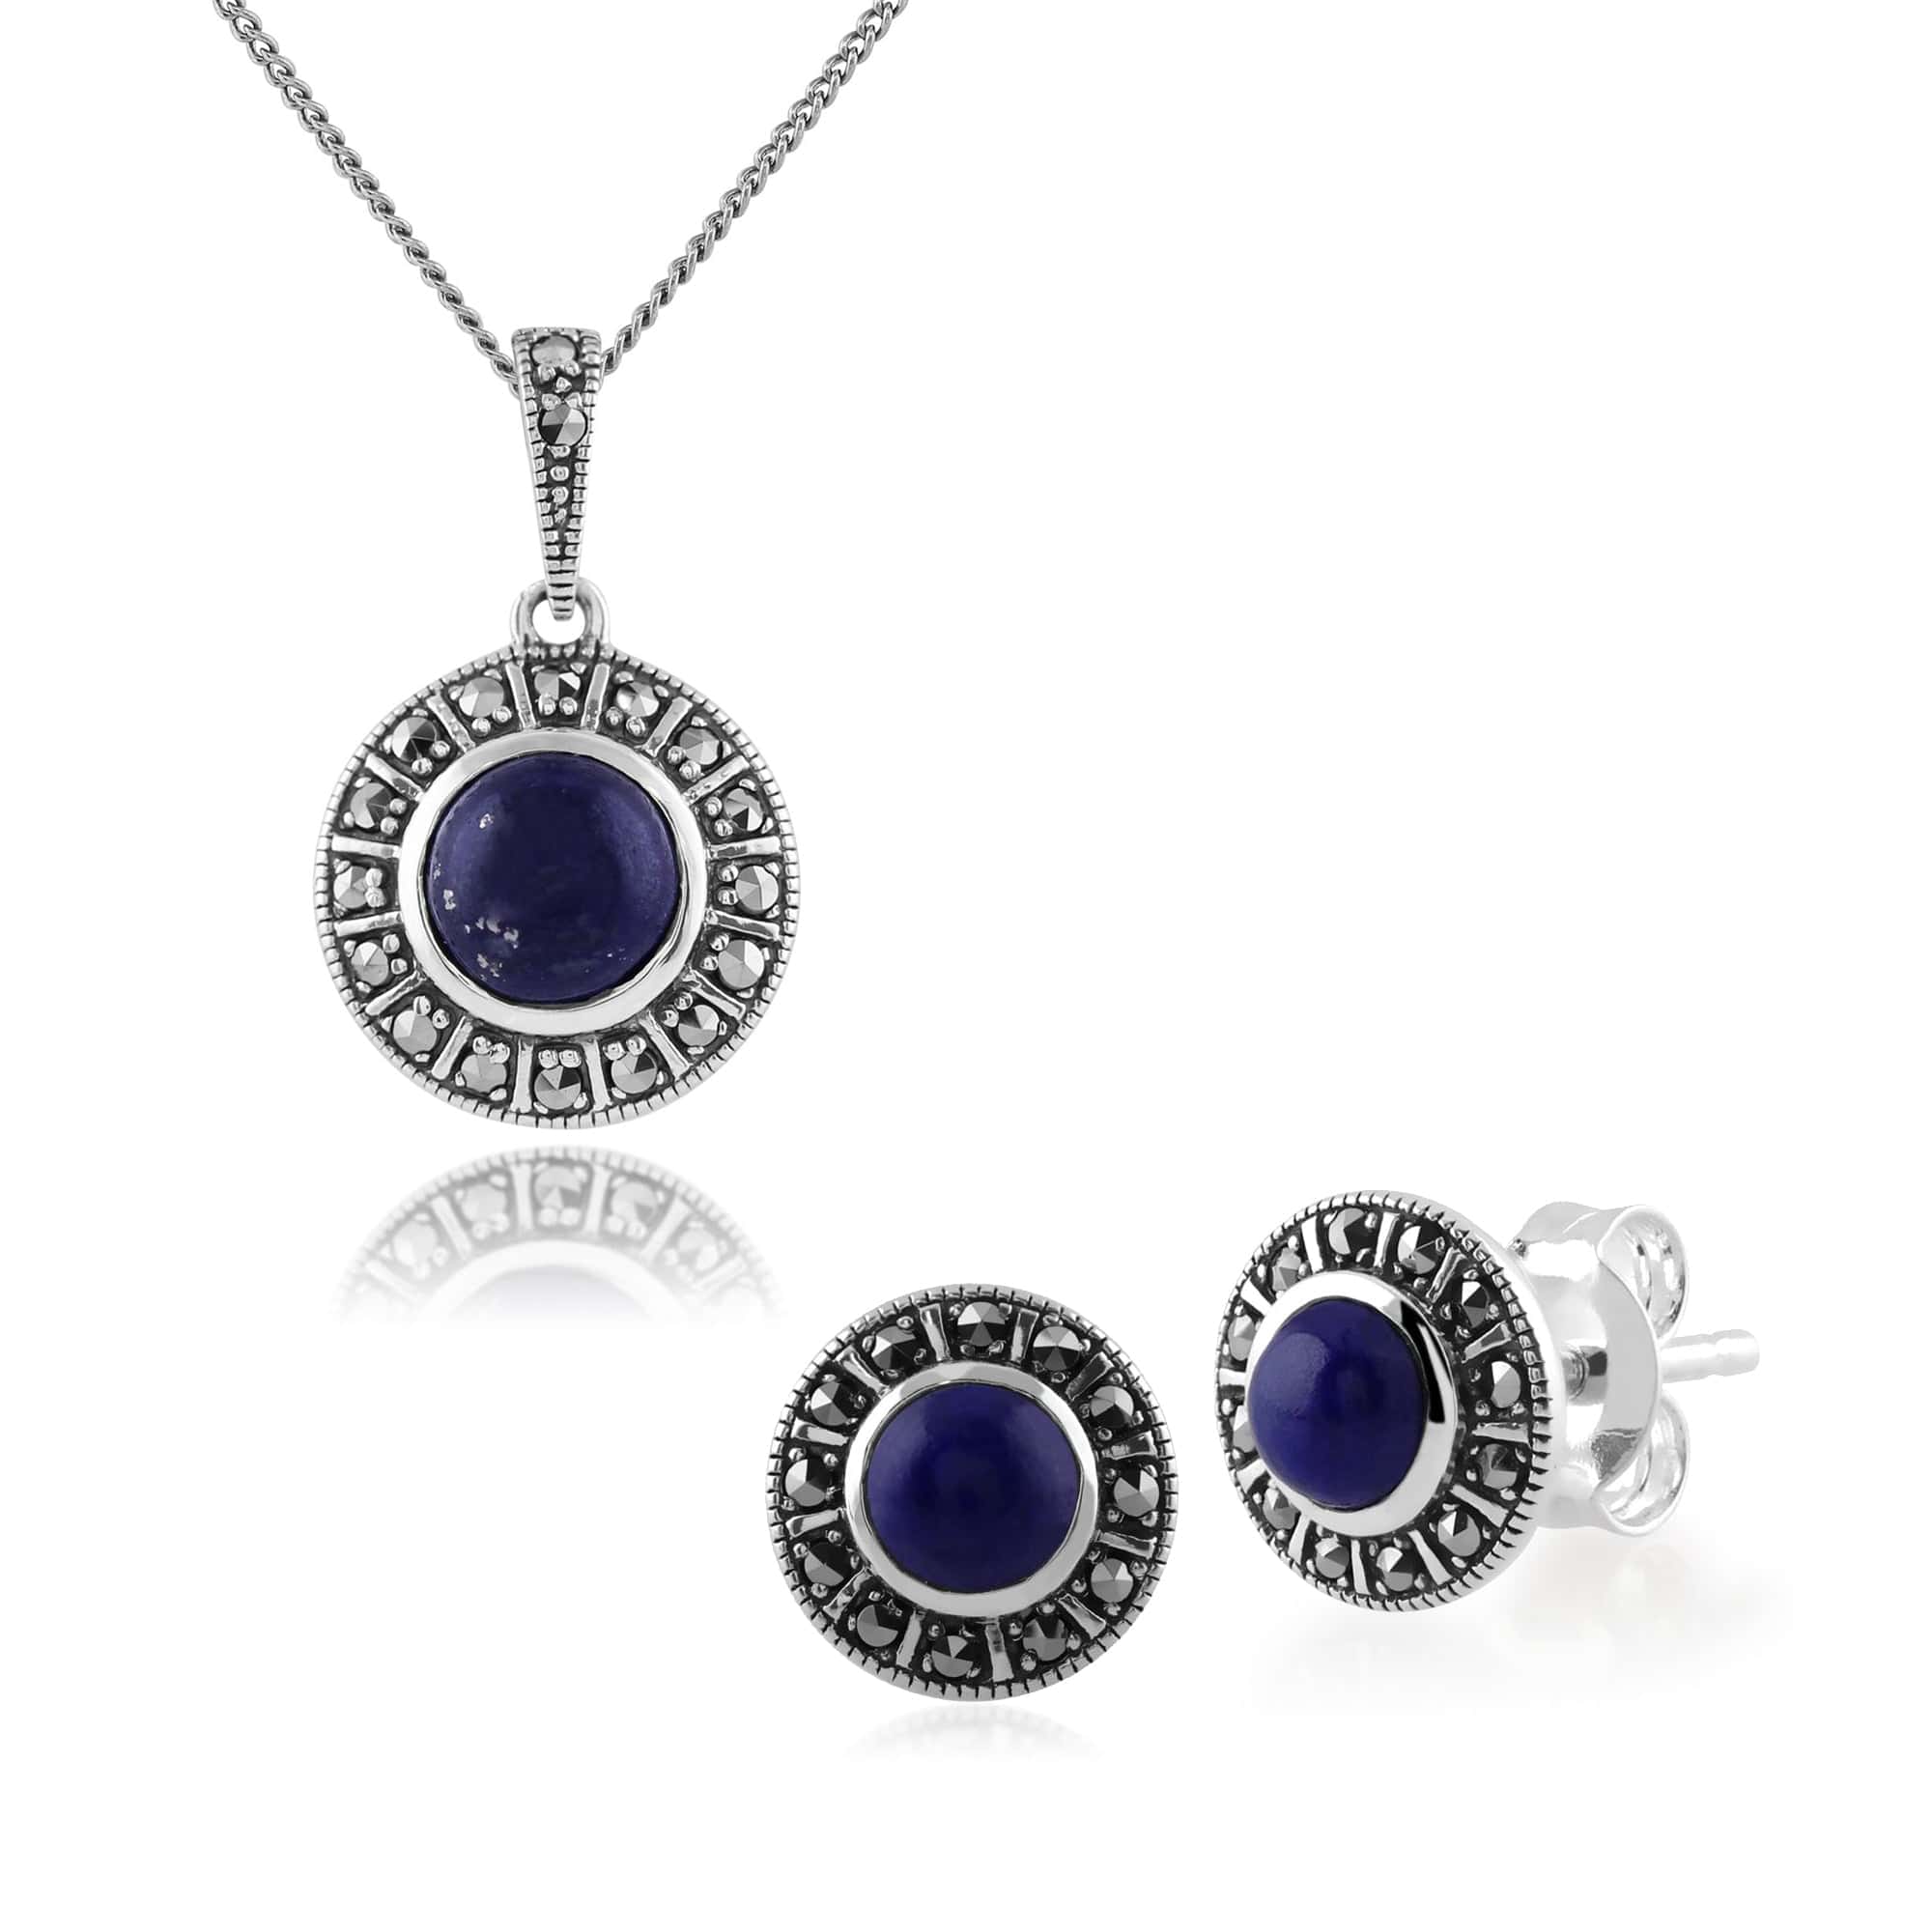 214E850402925-214N646503925 Art Deco Style Round Lapis Lazuli & Marcasite Halo Stud Earrings & Pendant Set in 925 Sterling Silver 1